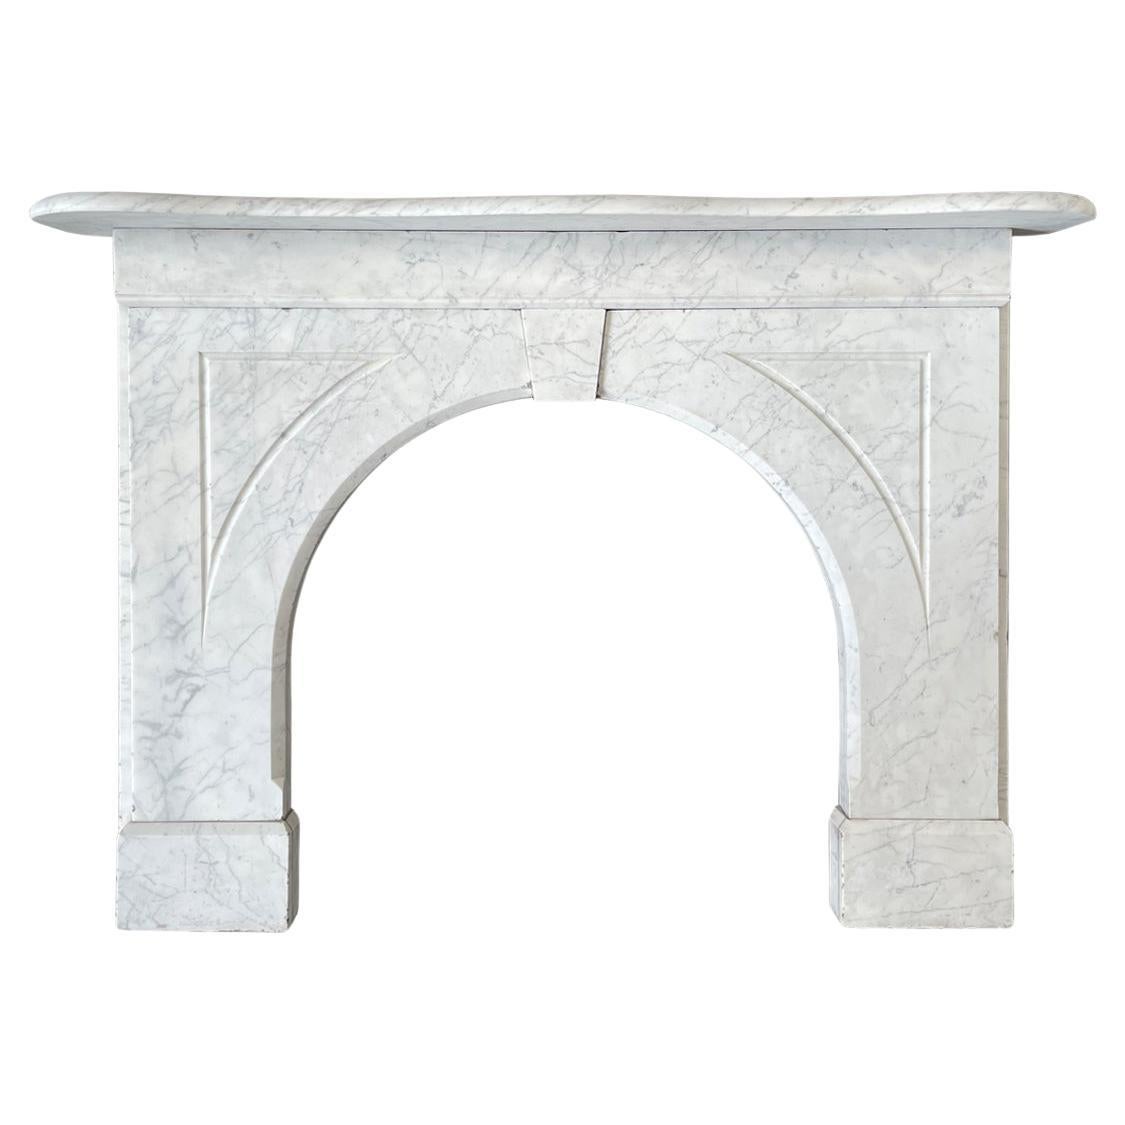 An arched Victorian Carrara marble fireplace surround of good proportions. The plain frieze sits below a serpentine mantle with a bullnose edge and above a plain keystone and flutes to the arched spandrels. Circa 1860.

For detailed sizes please see